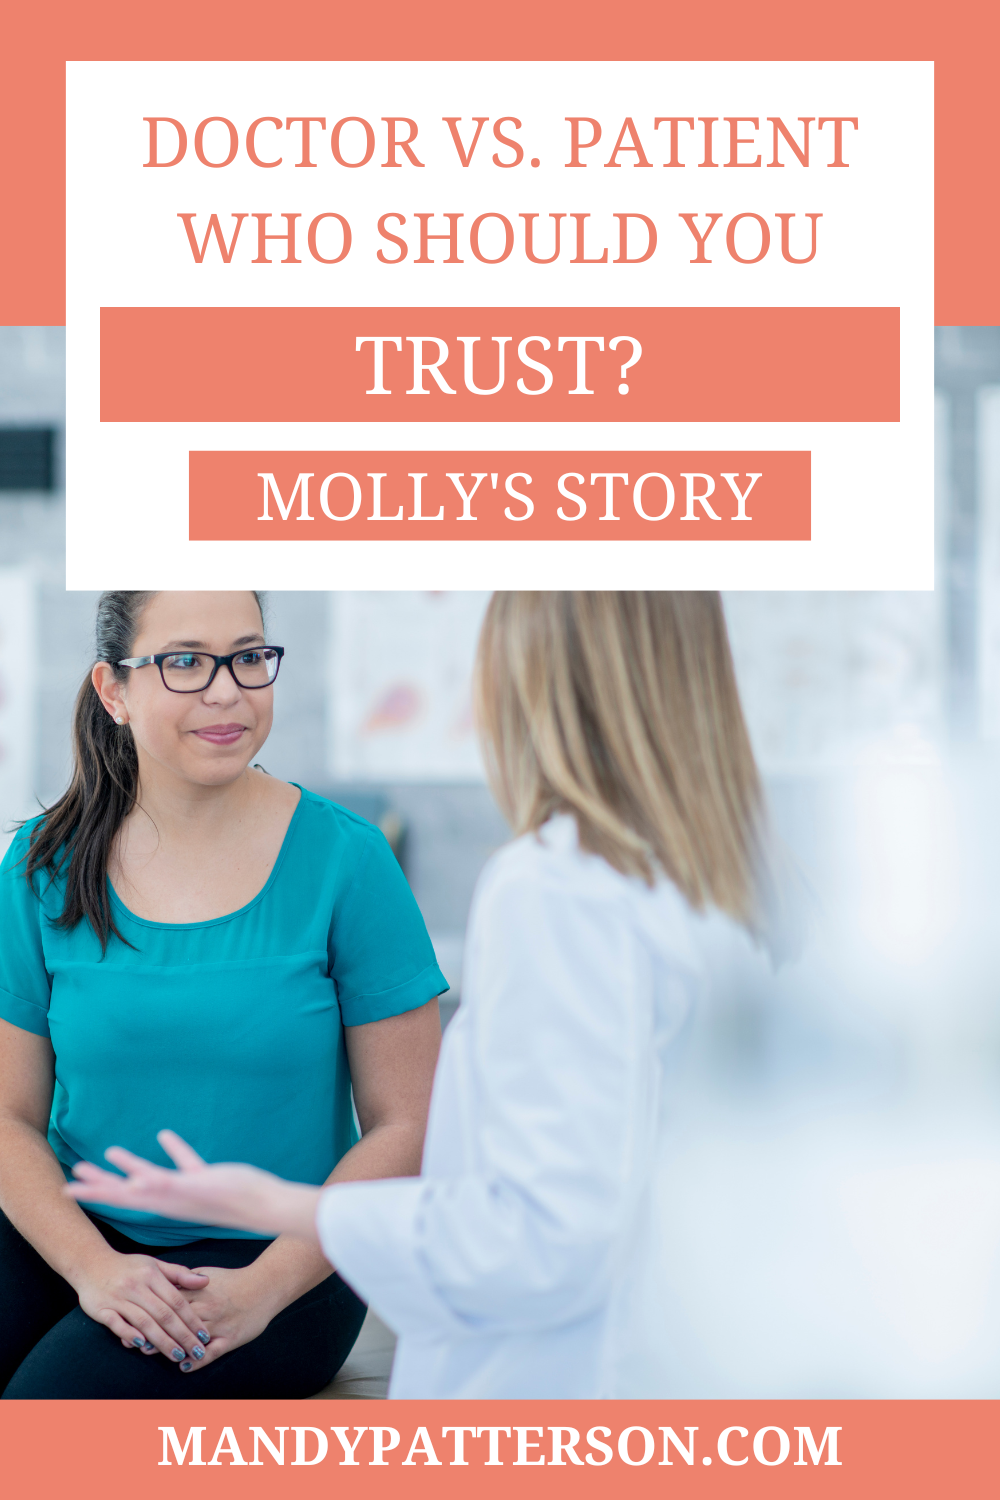 Doctor vs. Patient – Who Should You Trust? Molly’s Story